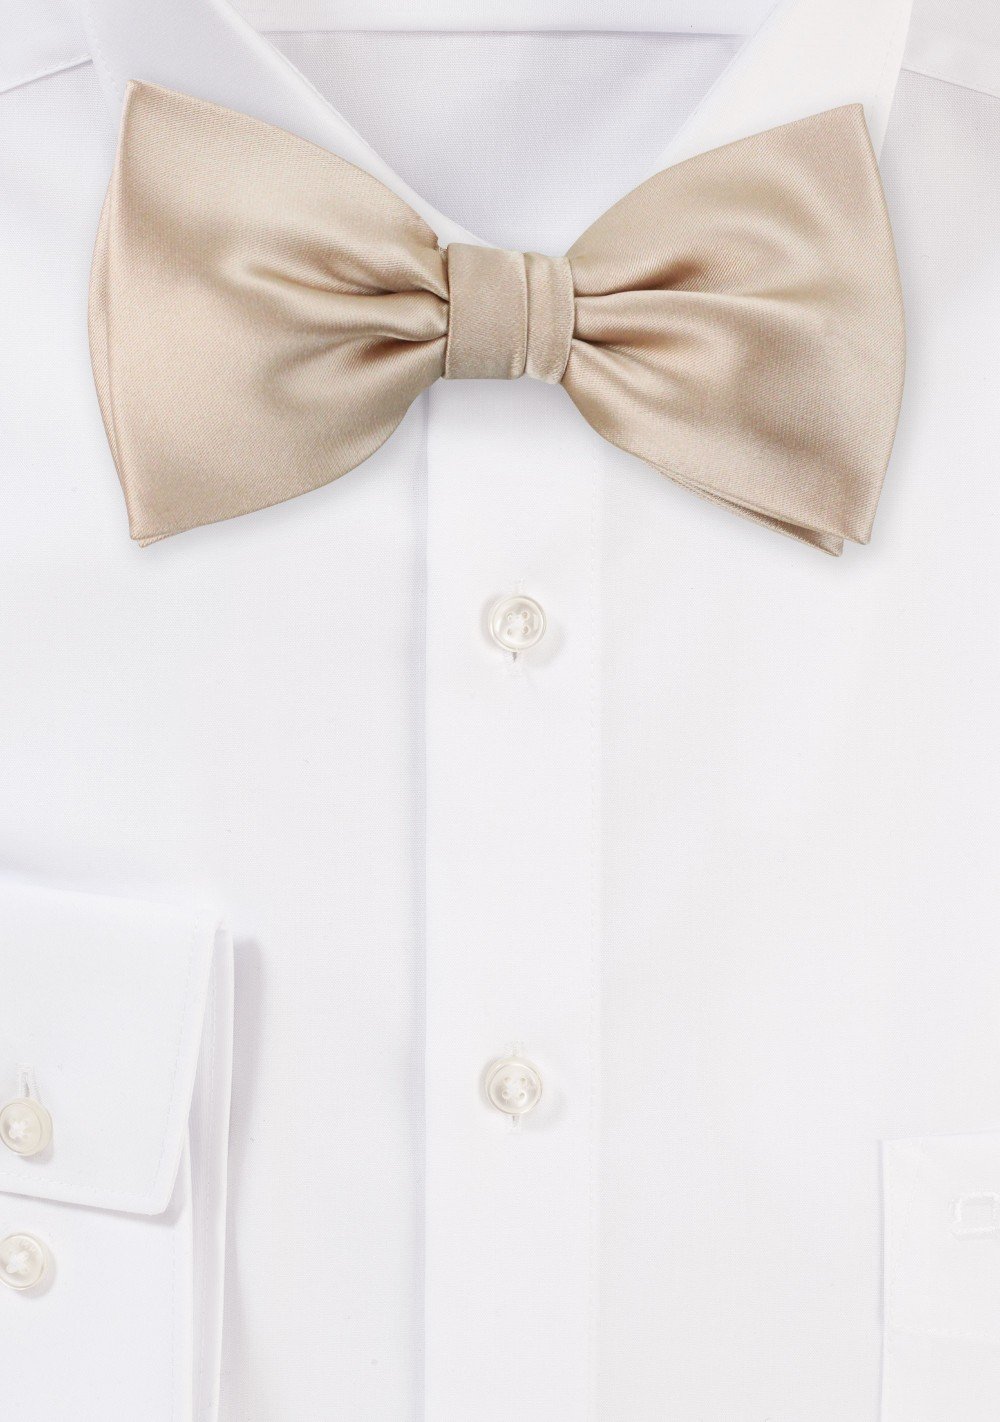 Bow Tie in Champagne